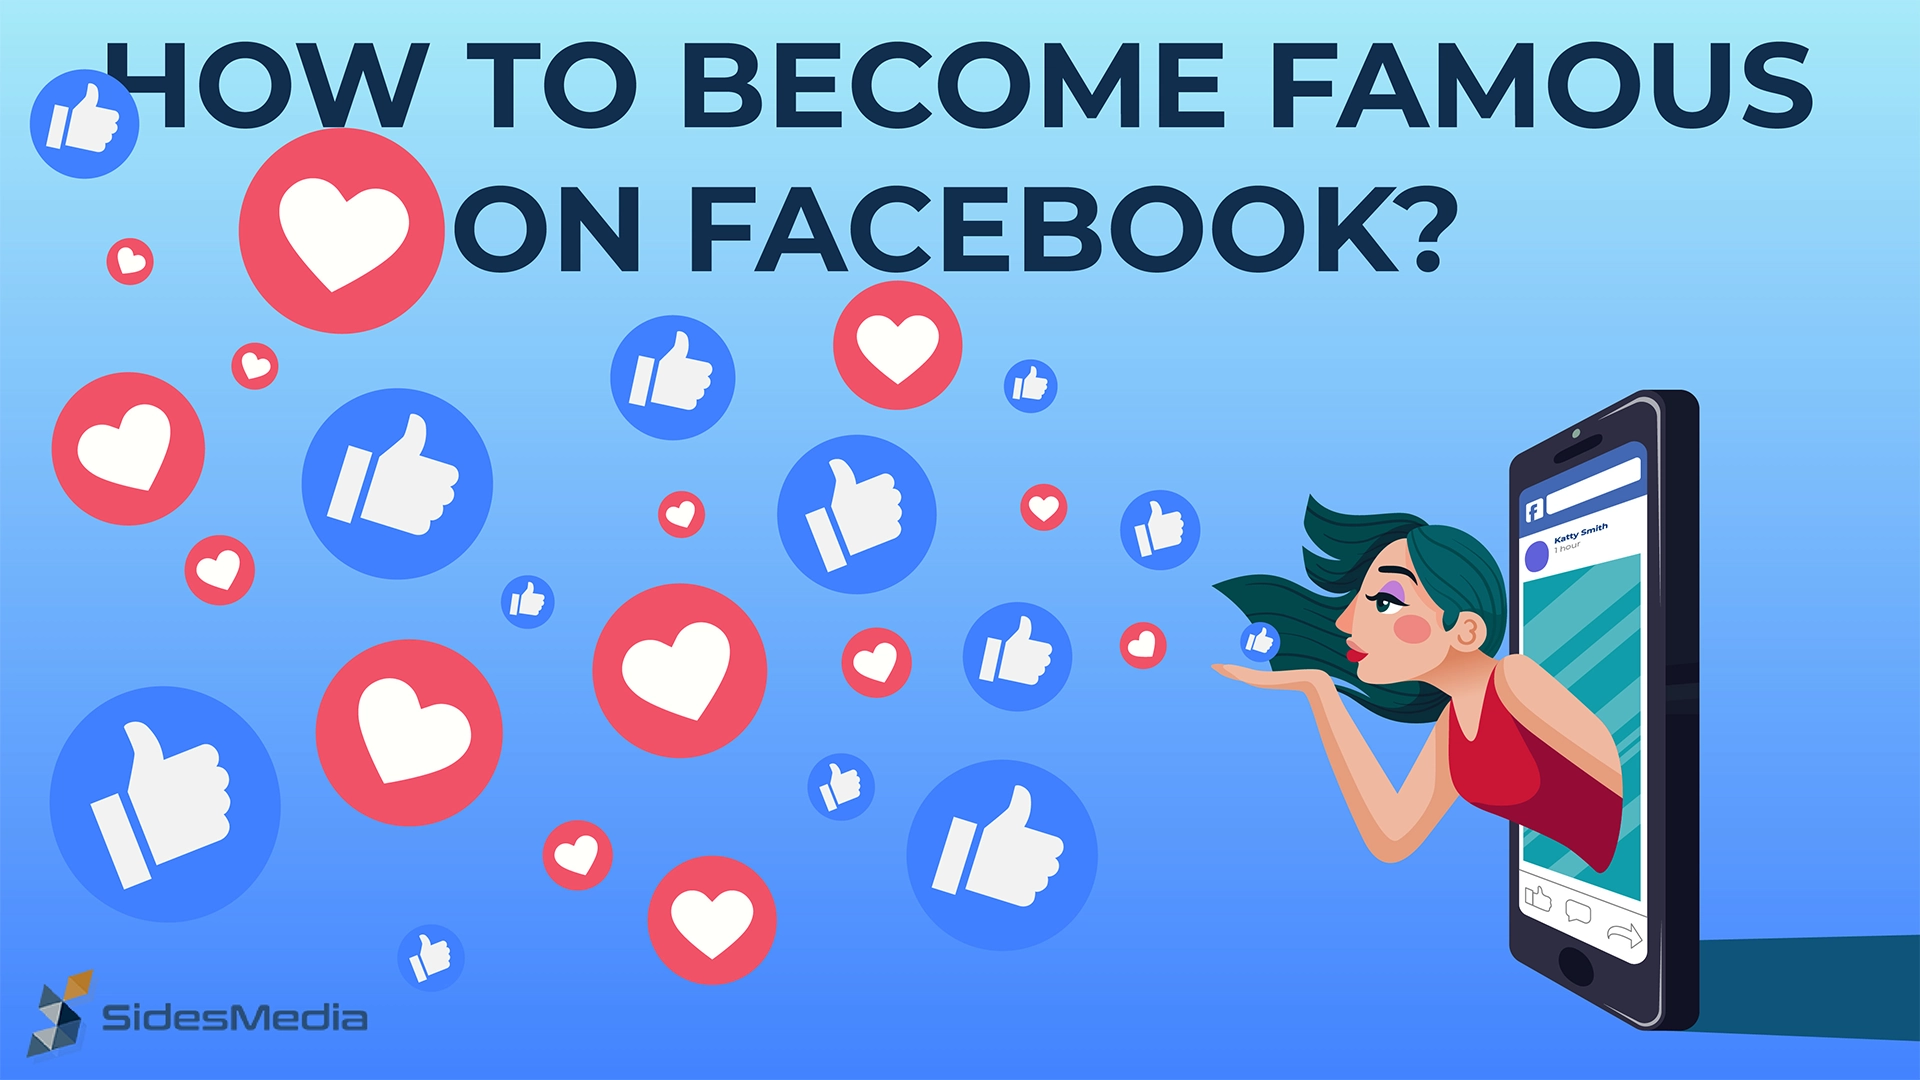 12 Tips How to Become Famous on Facebook